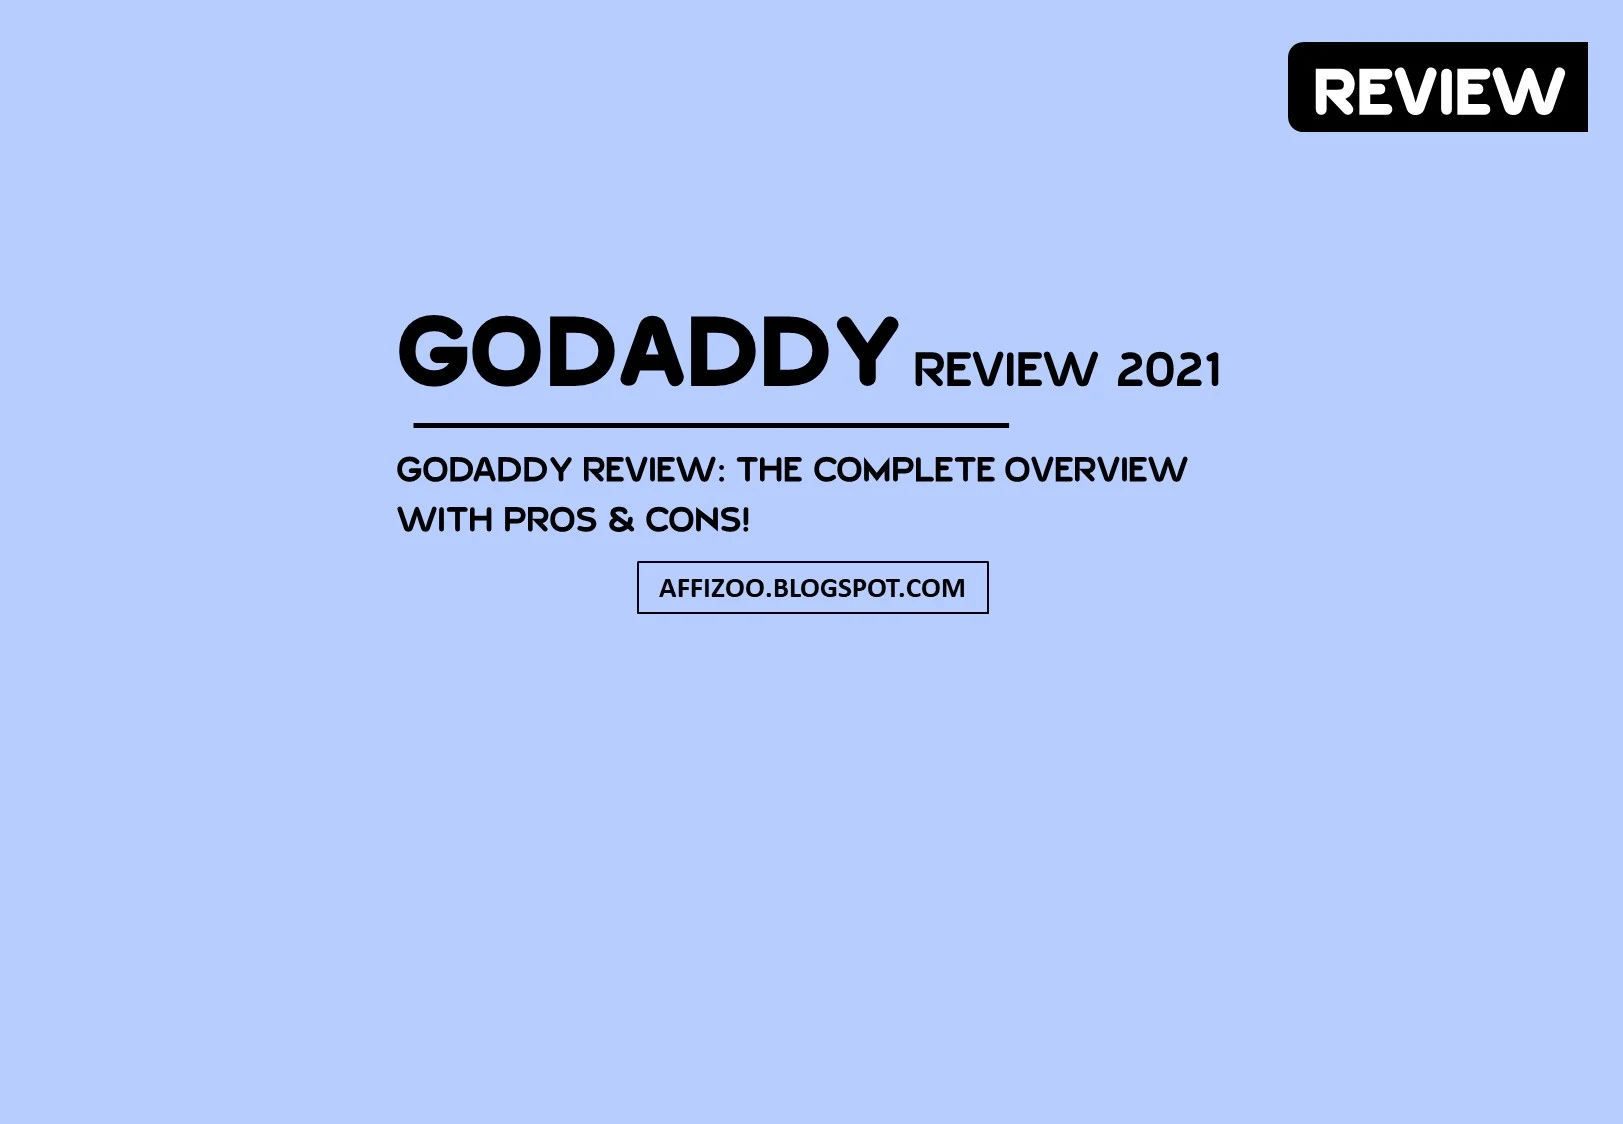 GoDaddy Review 2021: What's New In GoDaddy? Complete Overview With Pros & Cons